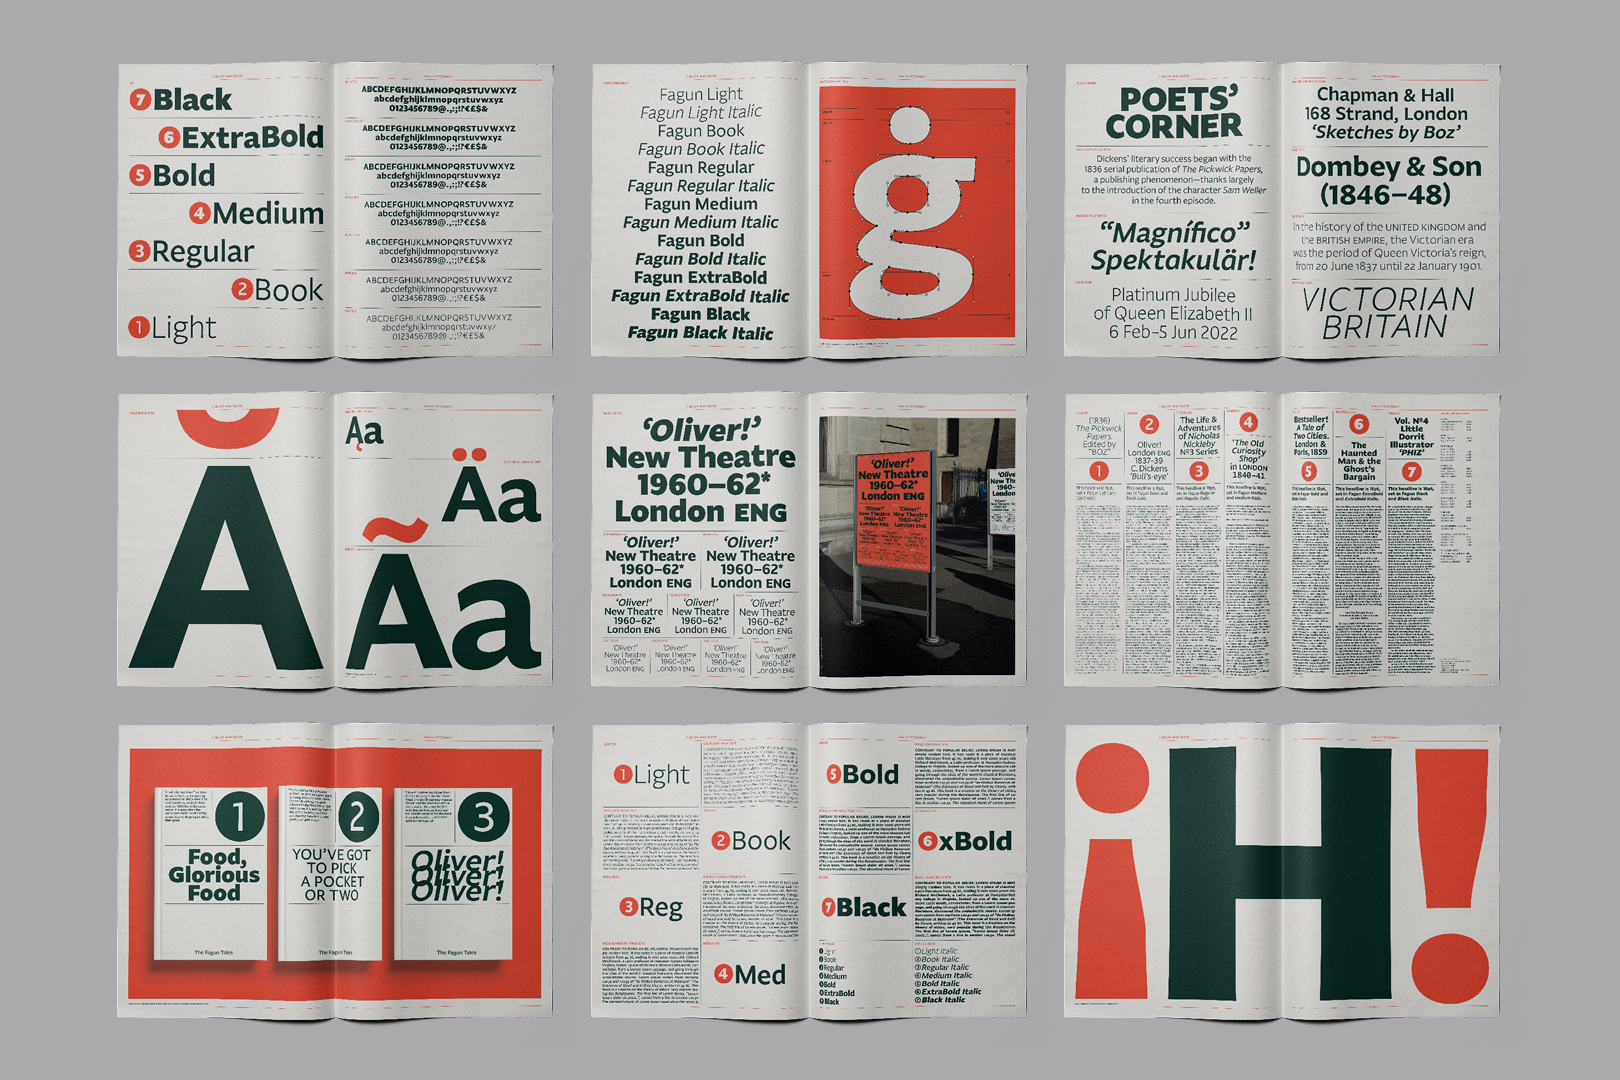 Winners from 42 Countries Announced In TDC69 Competition - The Type  Directors Club